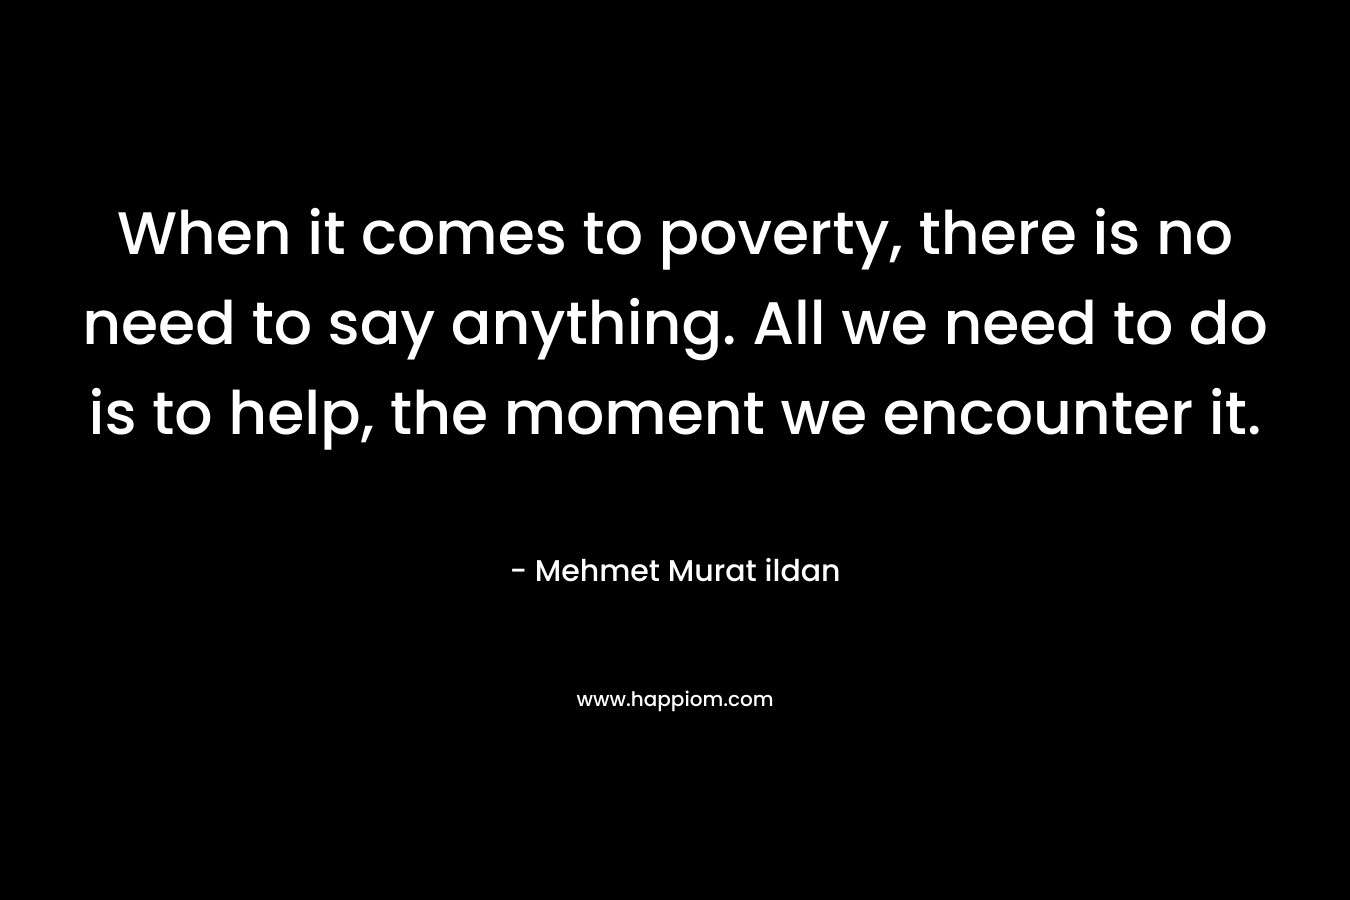 When it comes to poverty, there is no need to say anything. All we need to do is to help, the moment we encounter it.